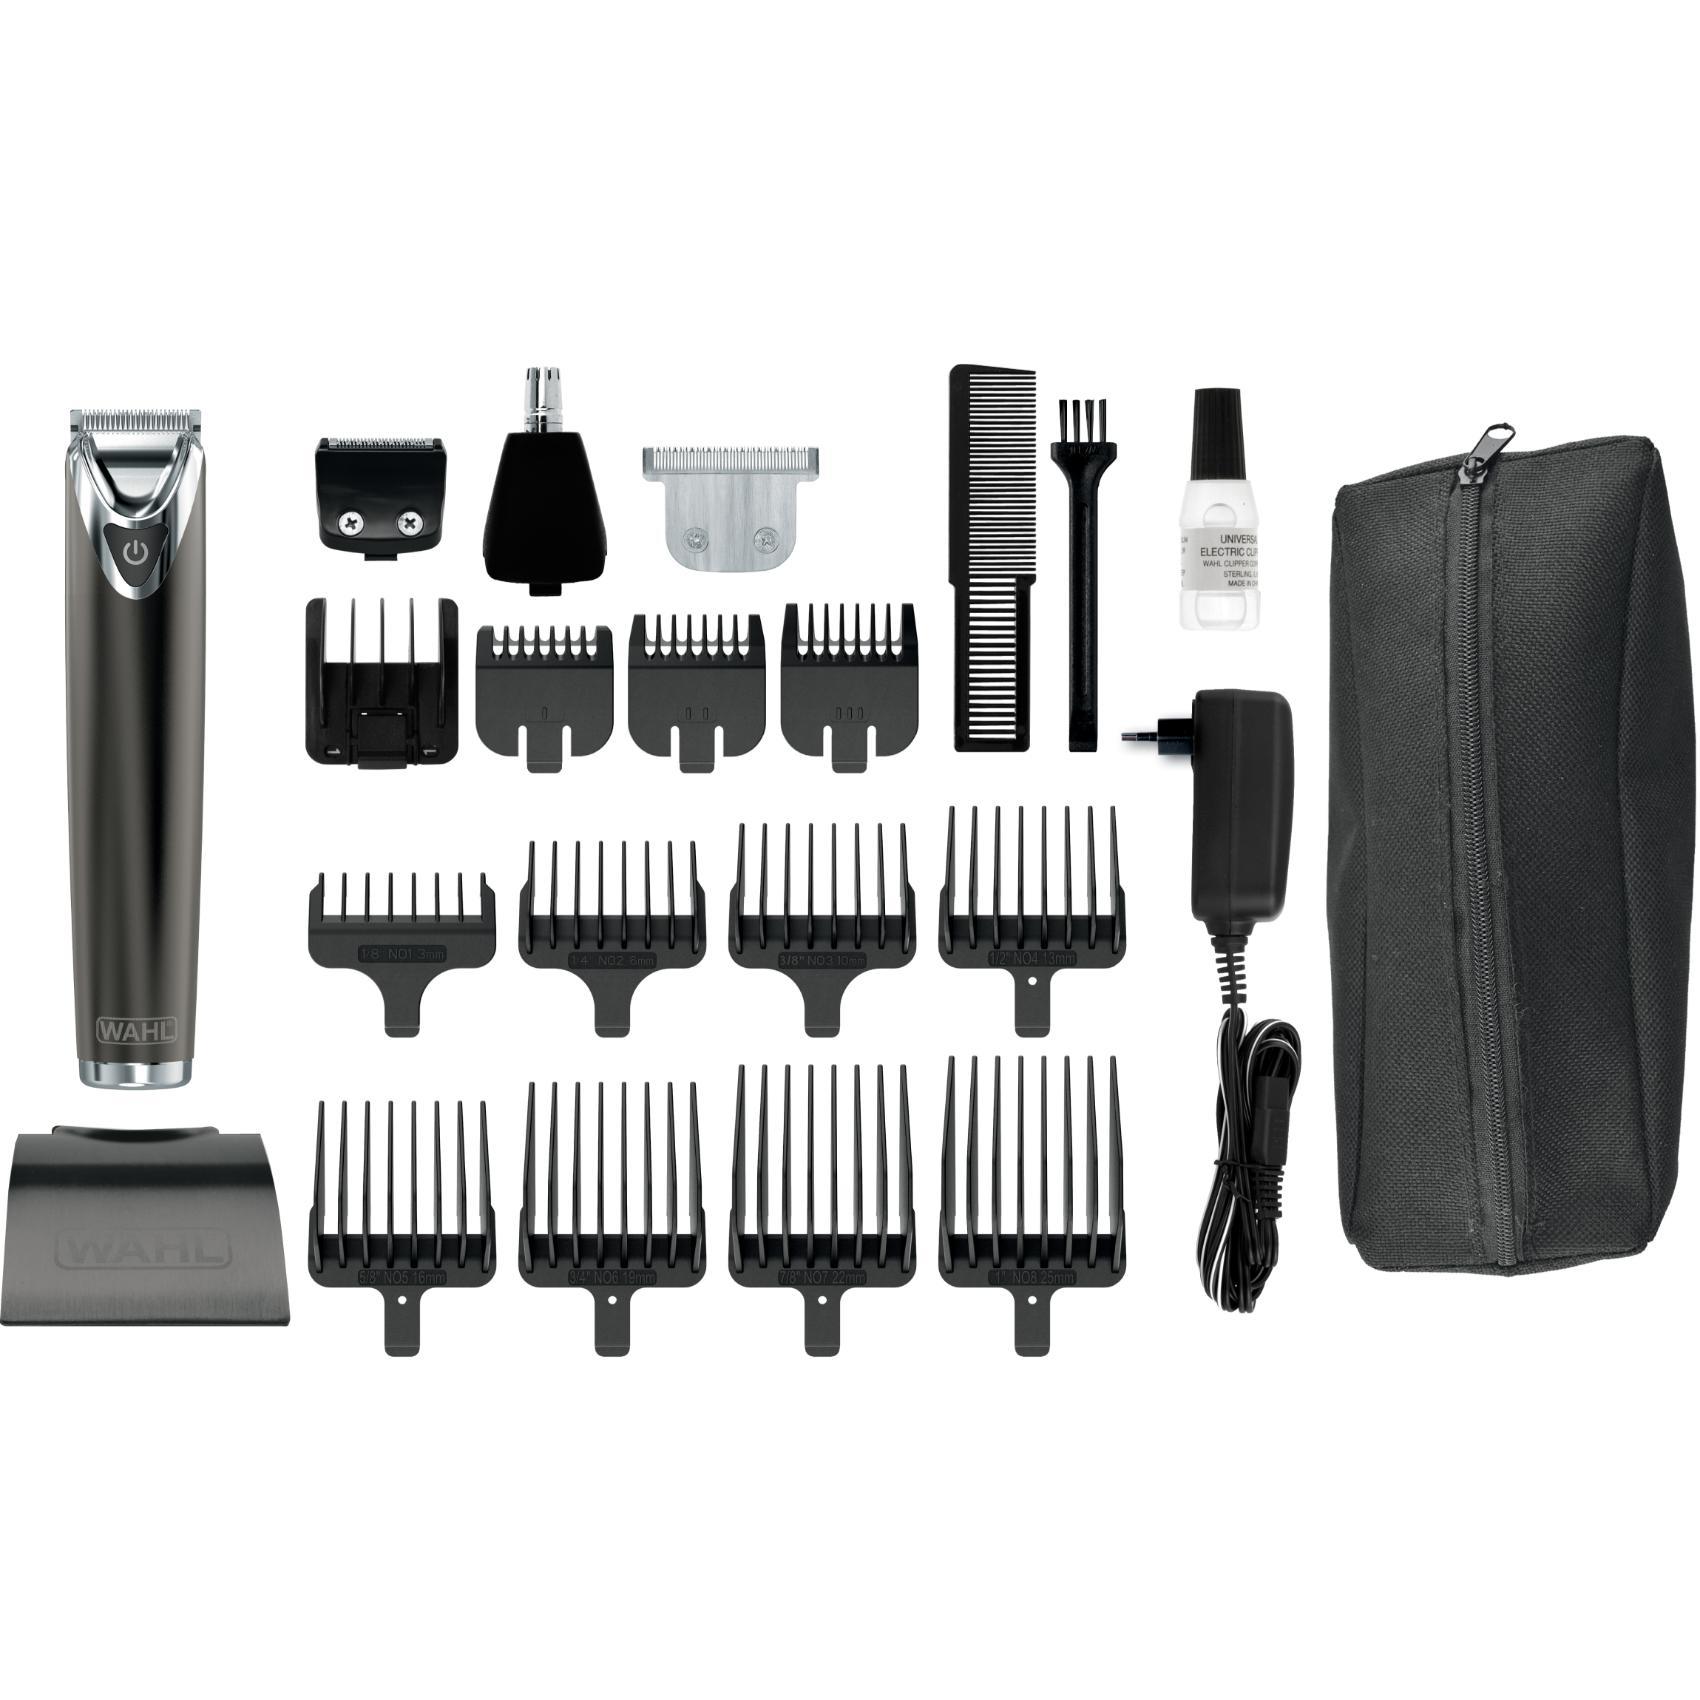 wahl stainless steel lithium ion attachments